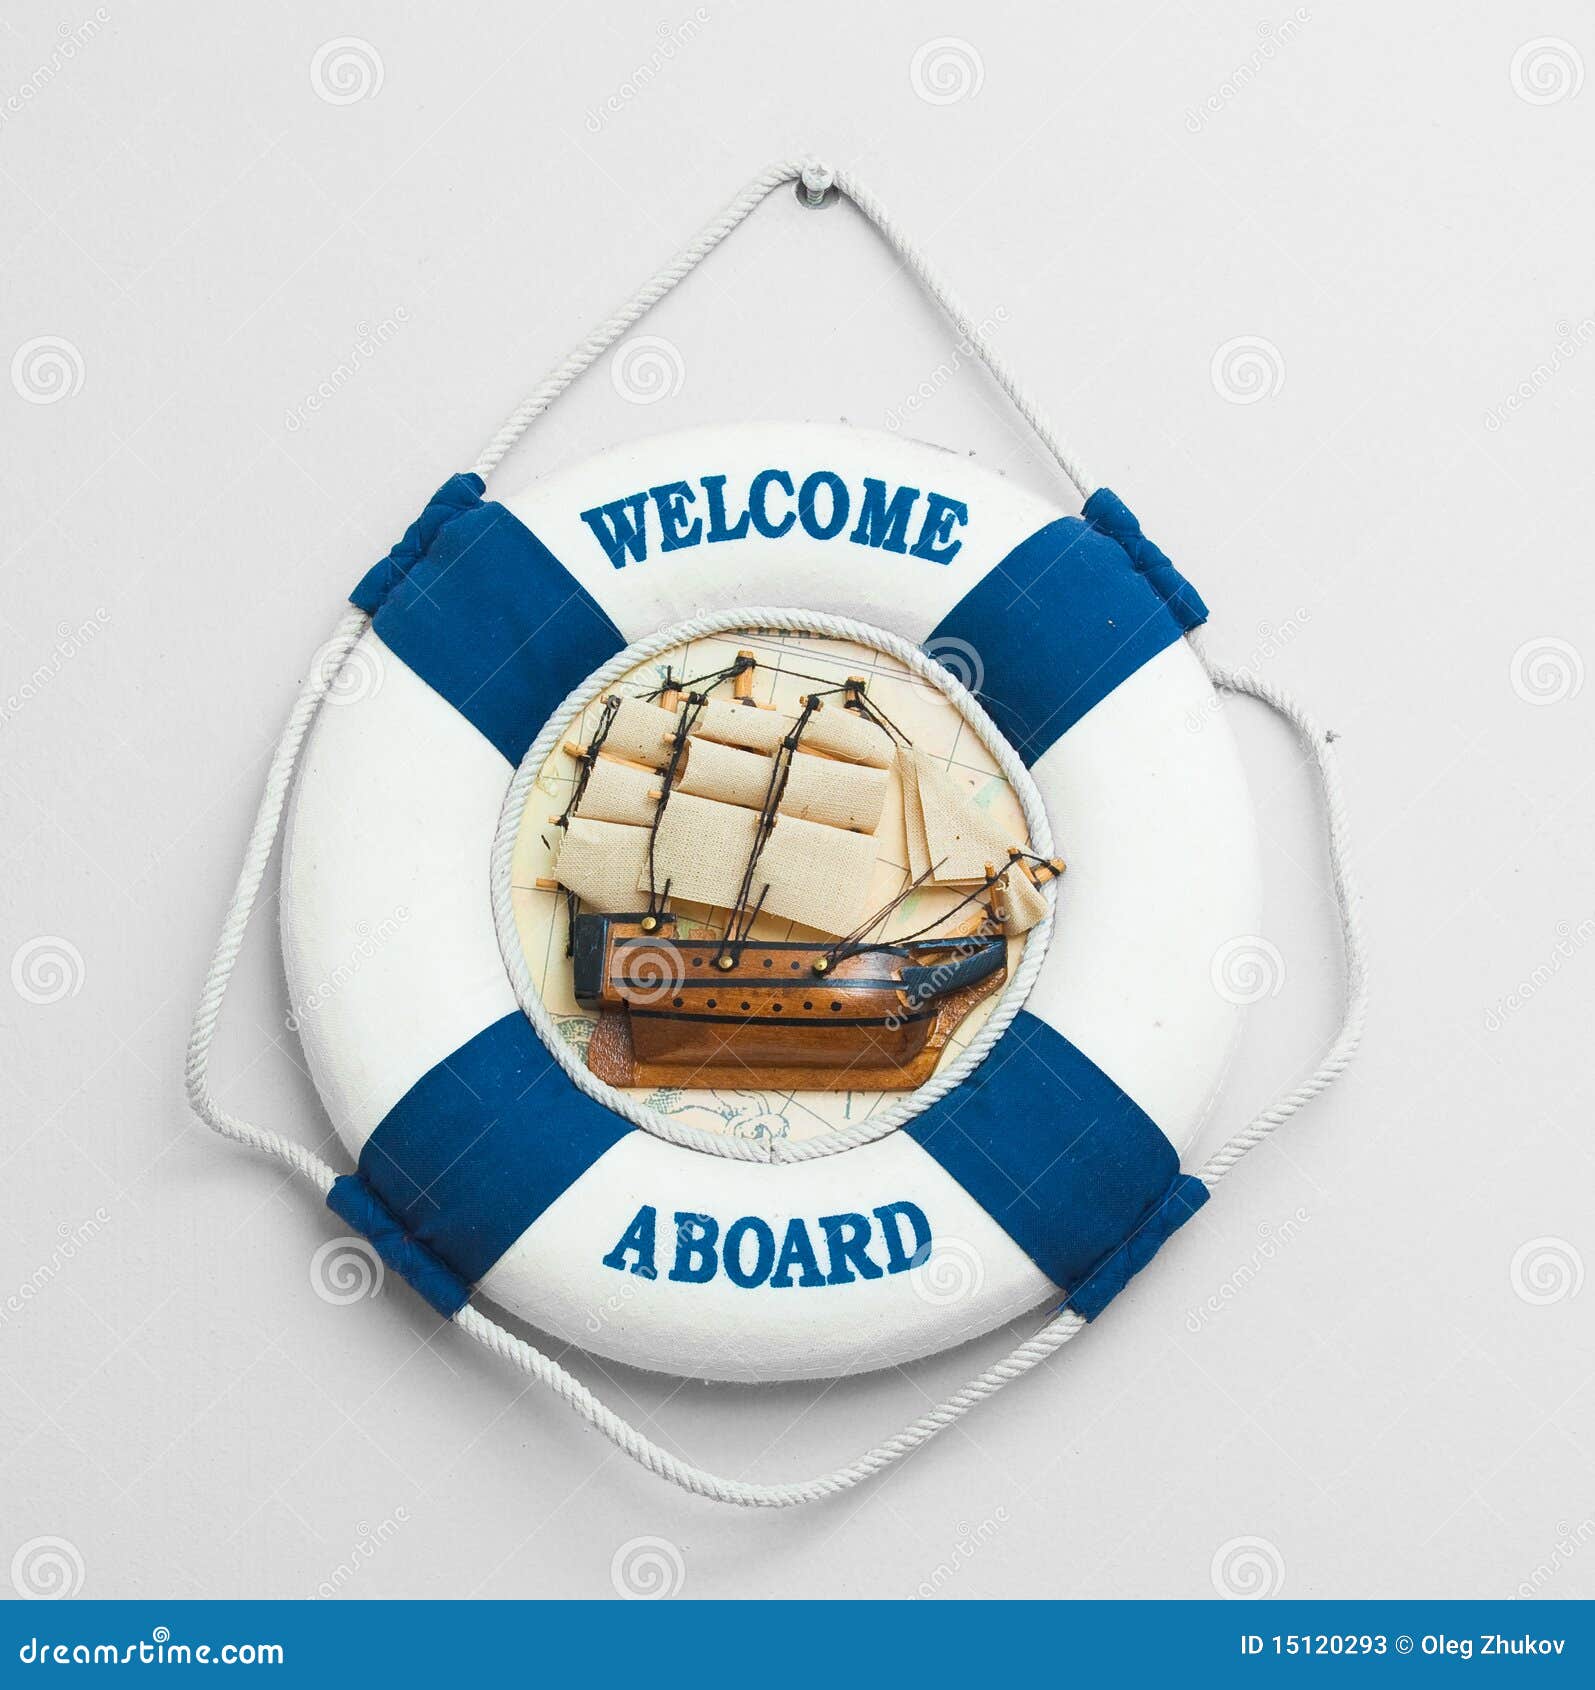 welcome aboard